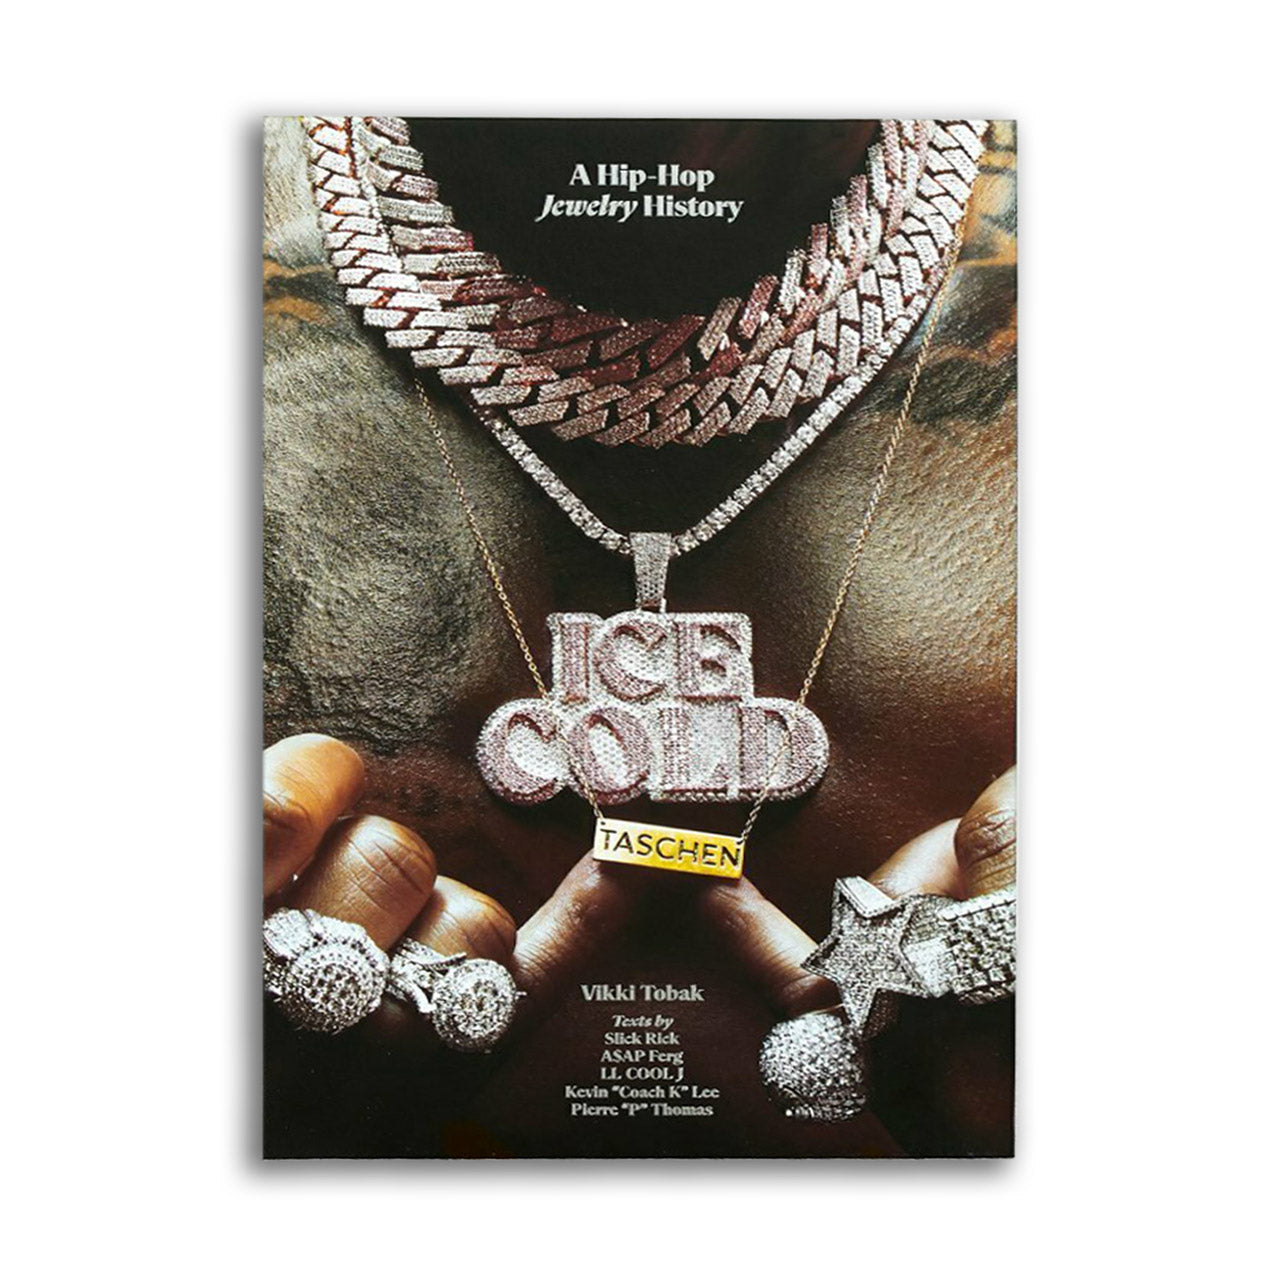 Ice Cold. A Hip-Hop Jewelry History #hiphop